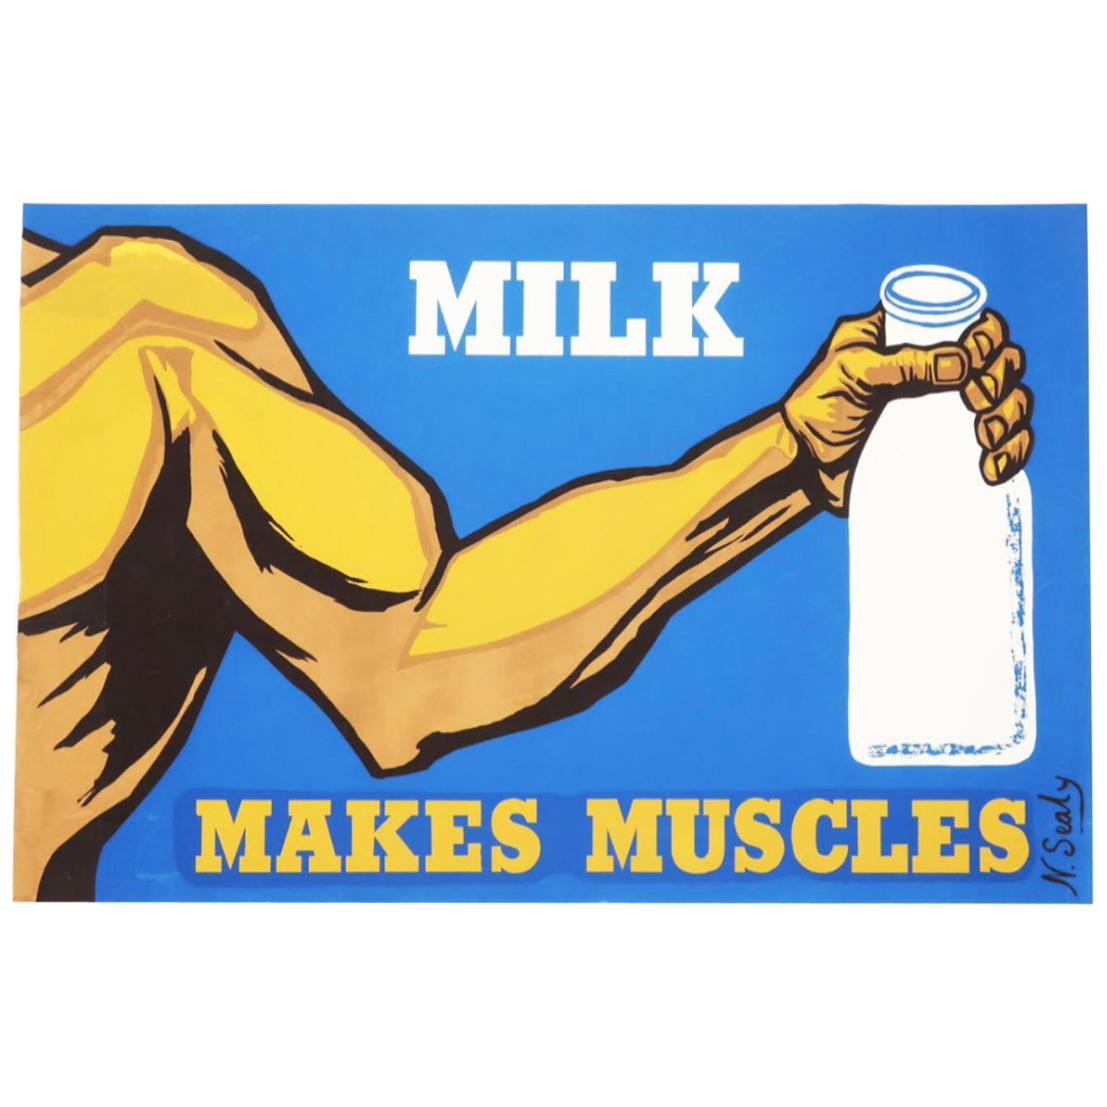 Vintage Milk Makes Muscles Serigraph by N. Sealy